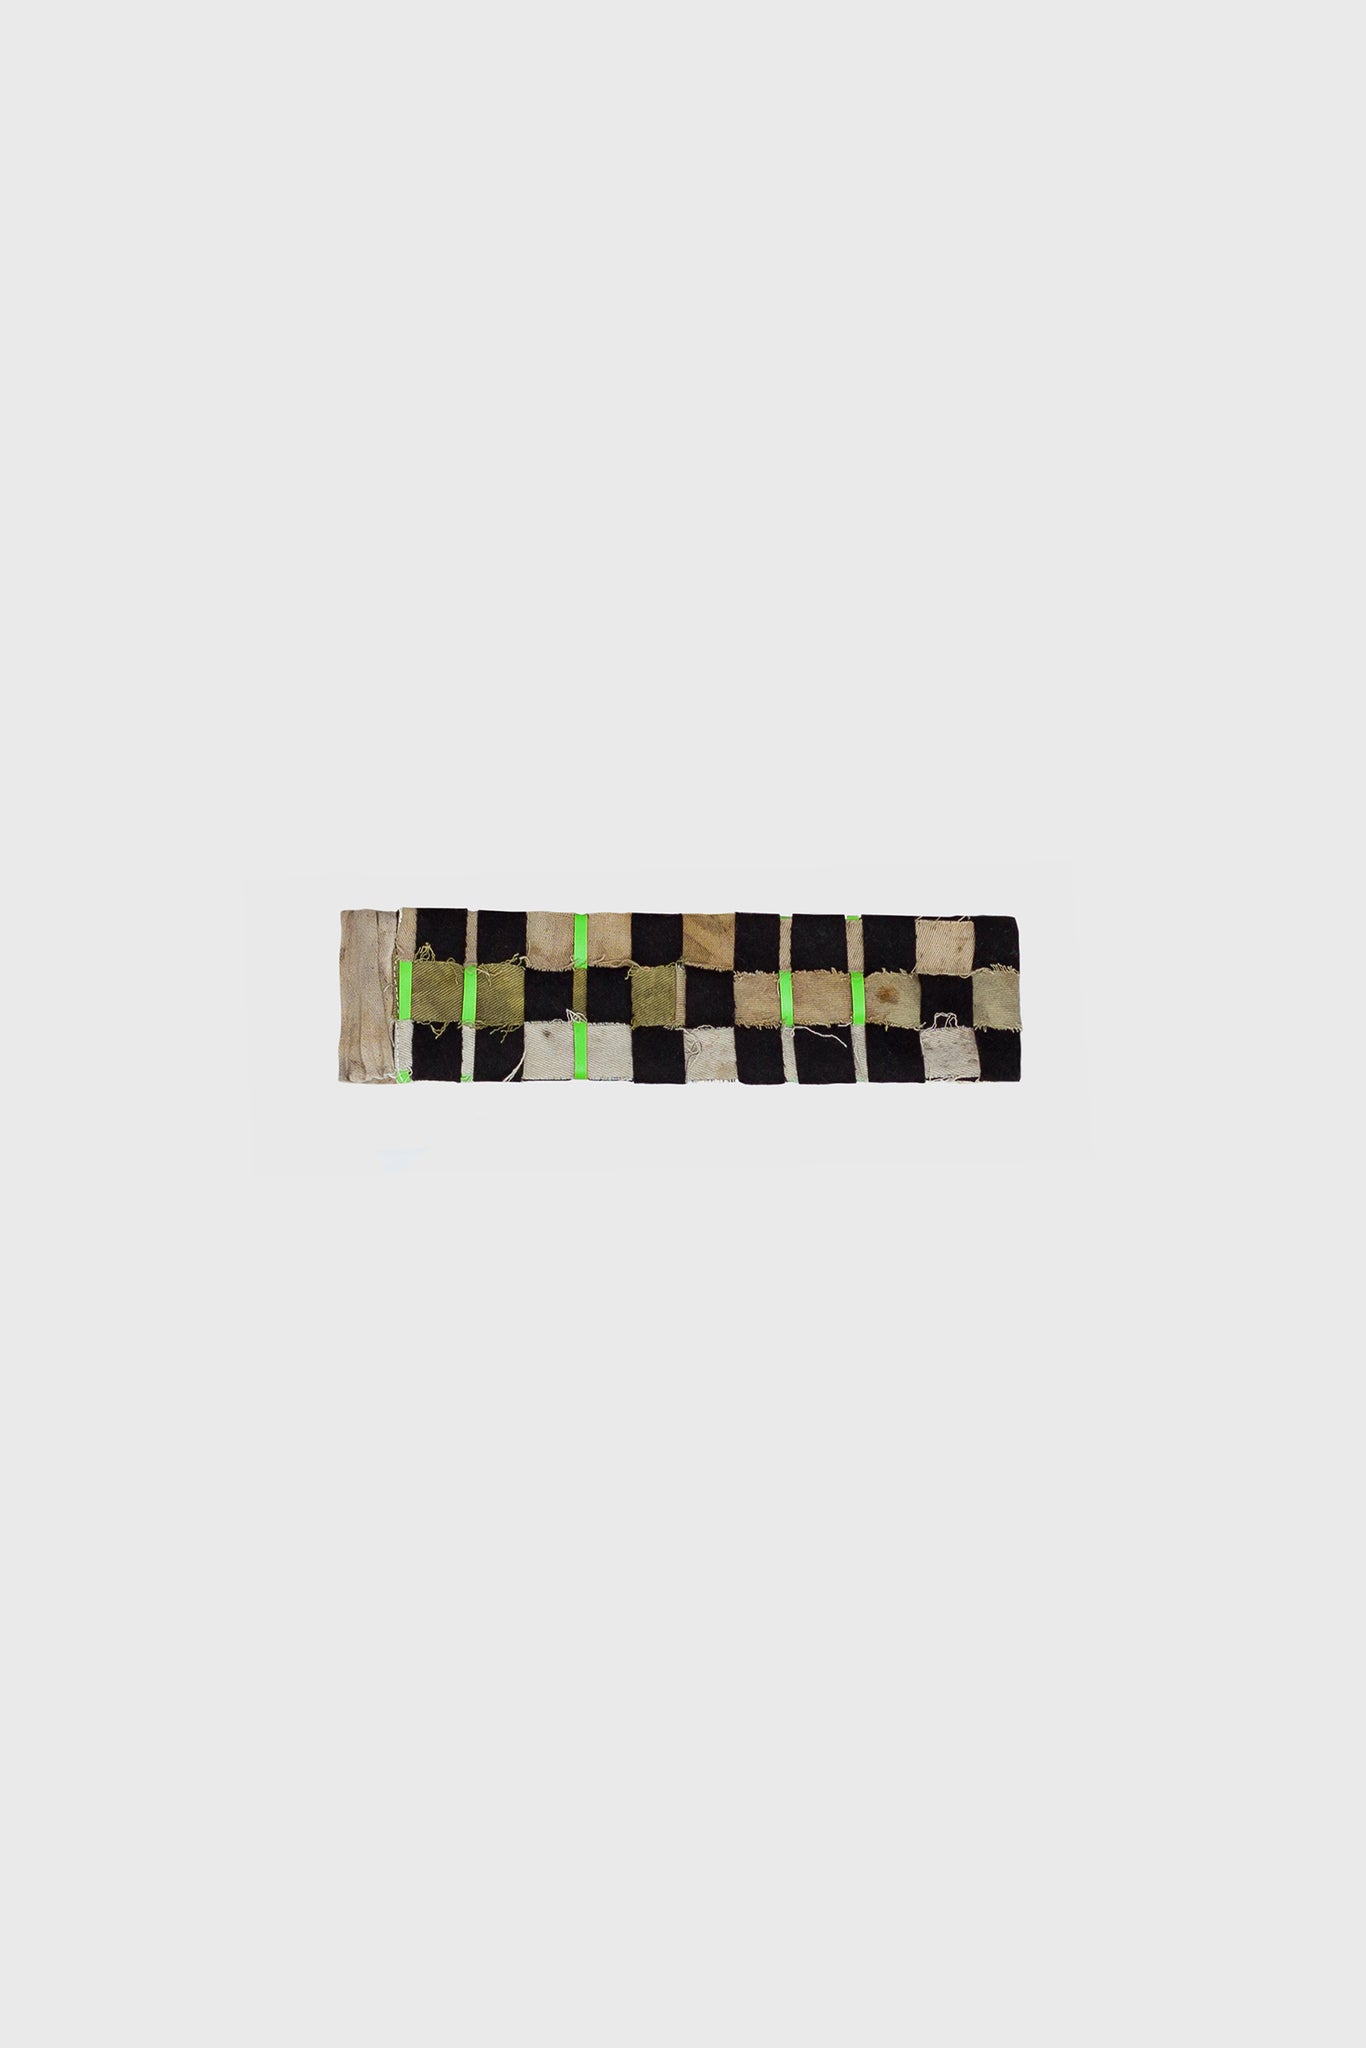 Woven hair band, style your hair with a healthy and natural solution, stay fashionable and chic, for stylish women, designed by Ruxandra, black green and earth tone checkers.